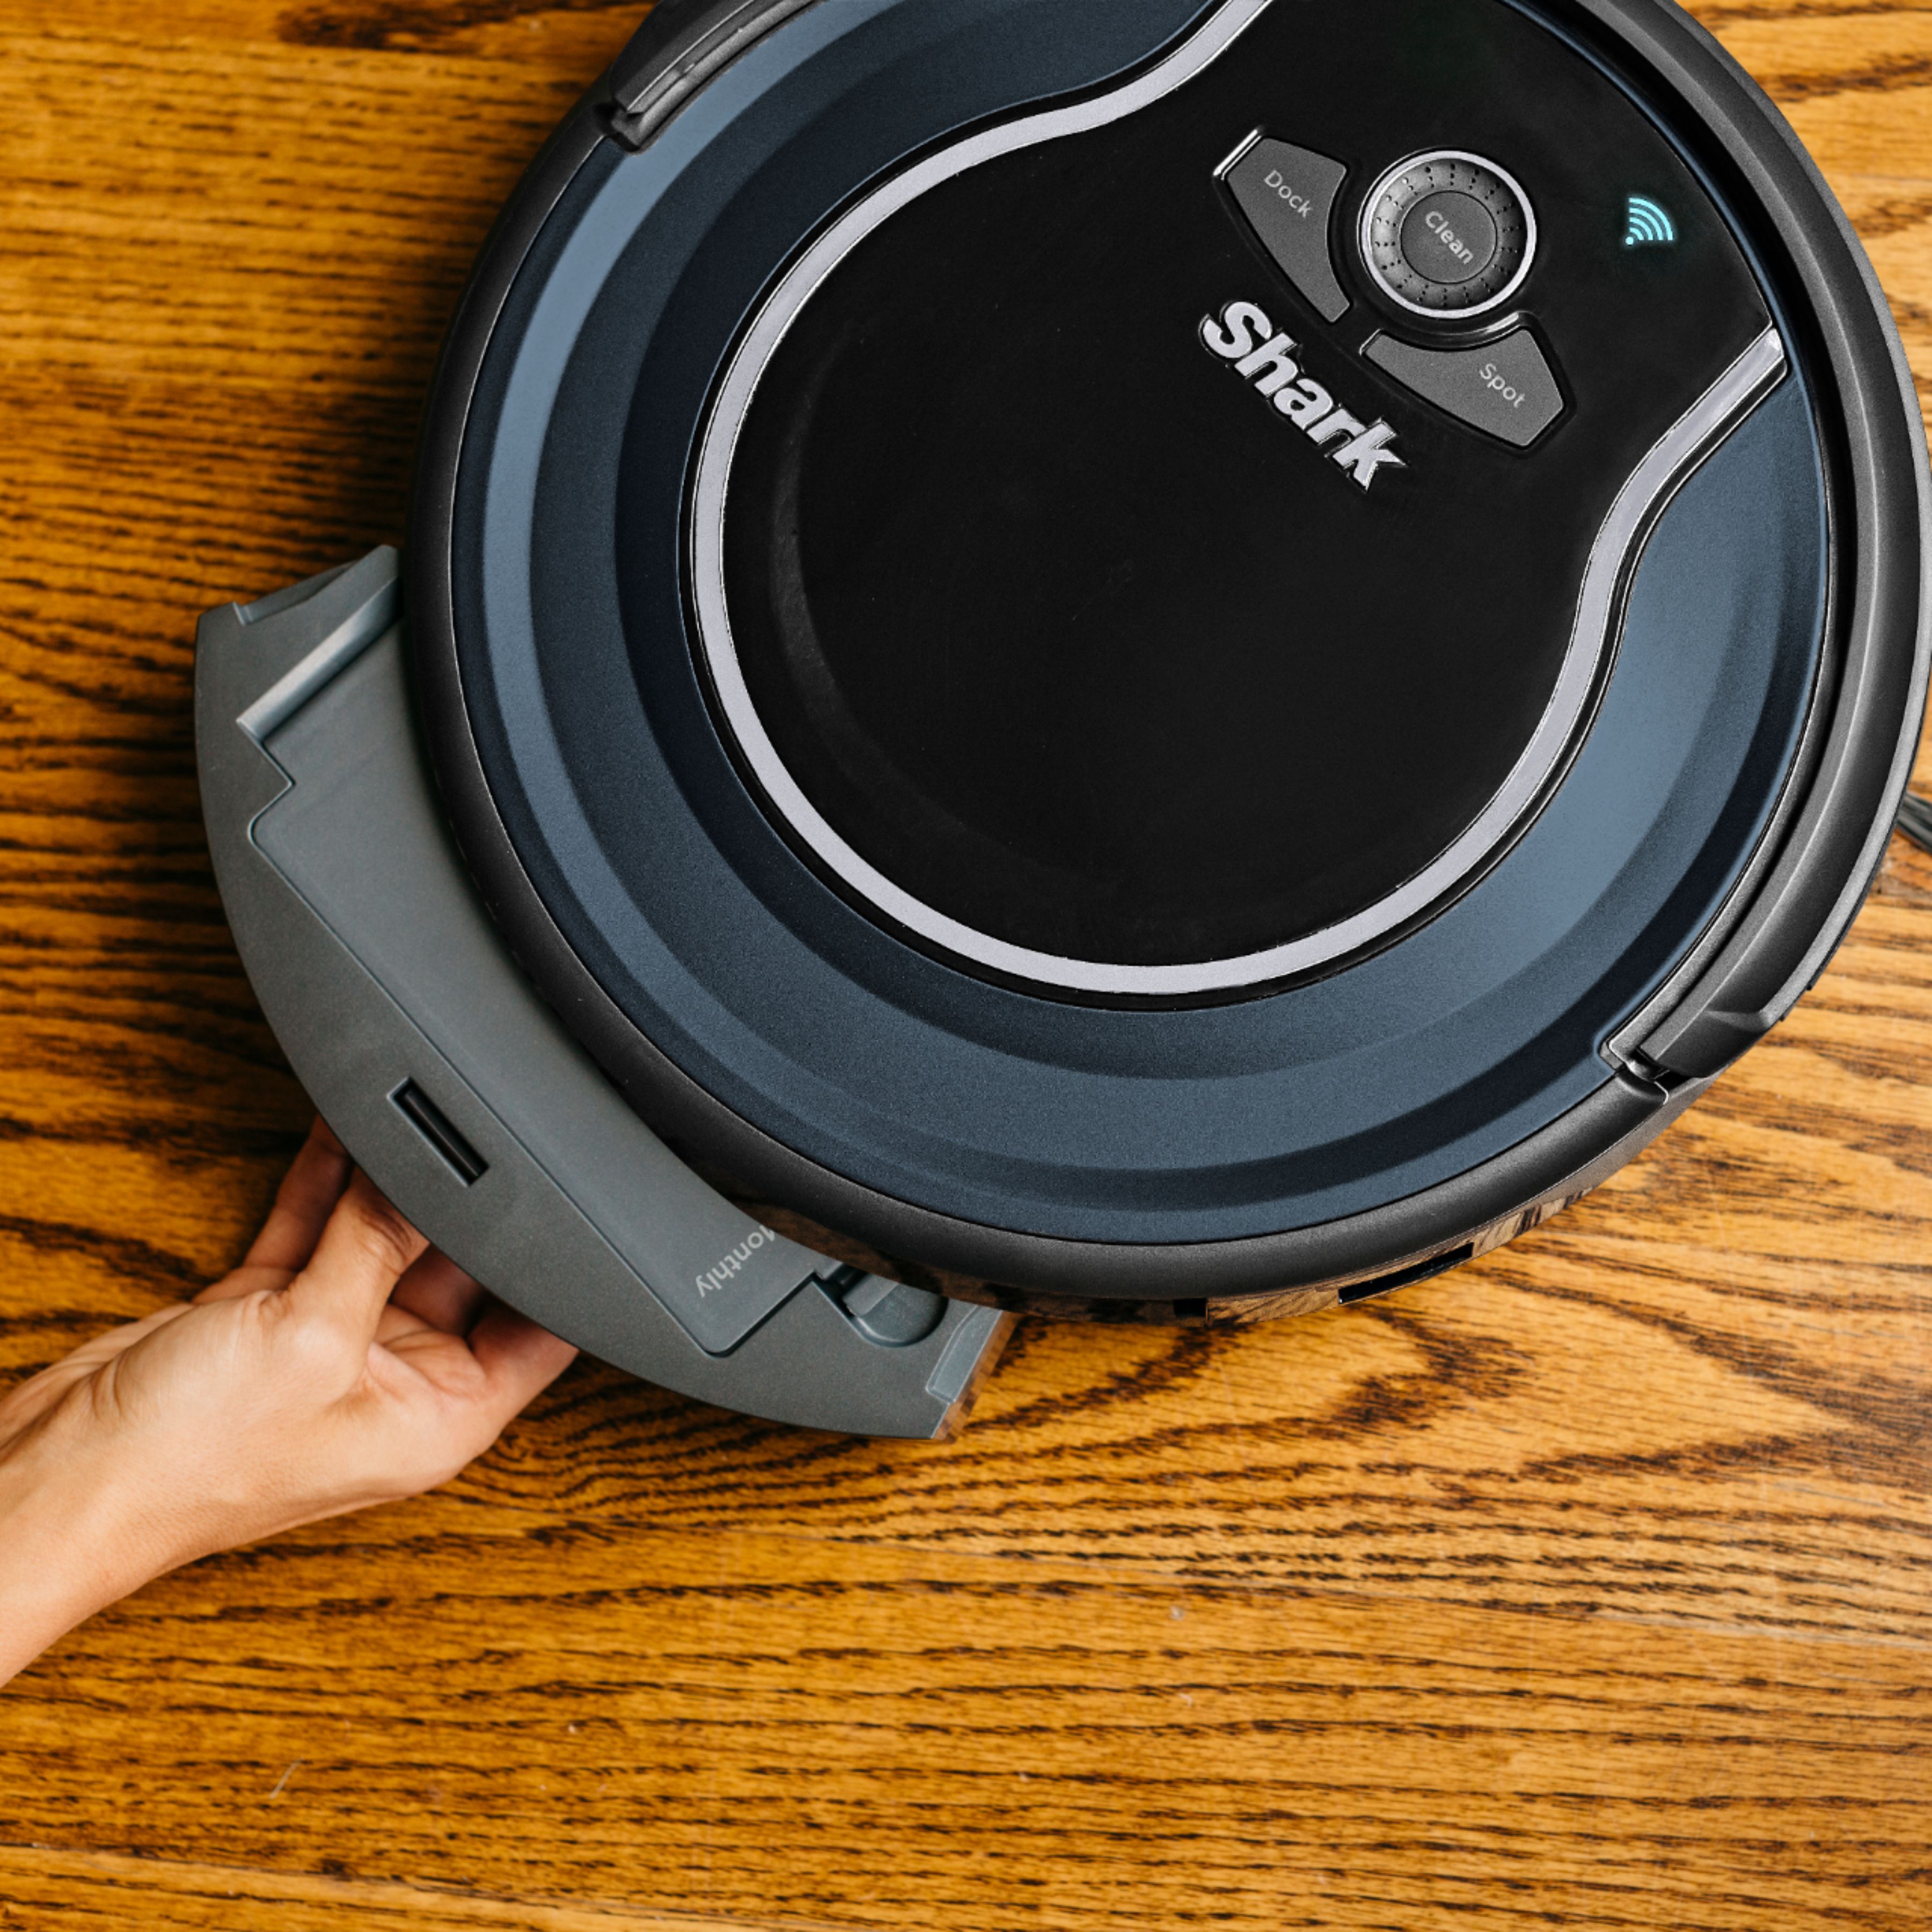 **NEW** Shark ION Robot RV761 Wi-Fi Robot Vacuum with Multi-Surface Cleaning 